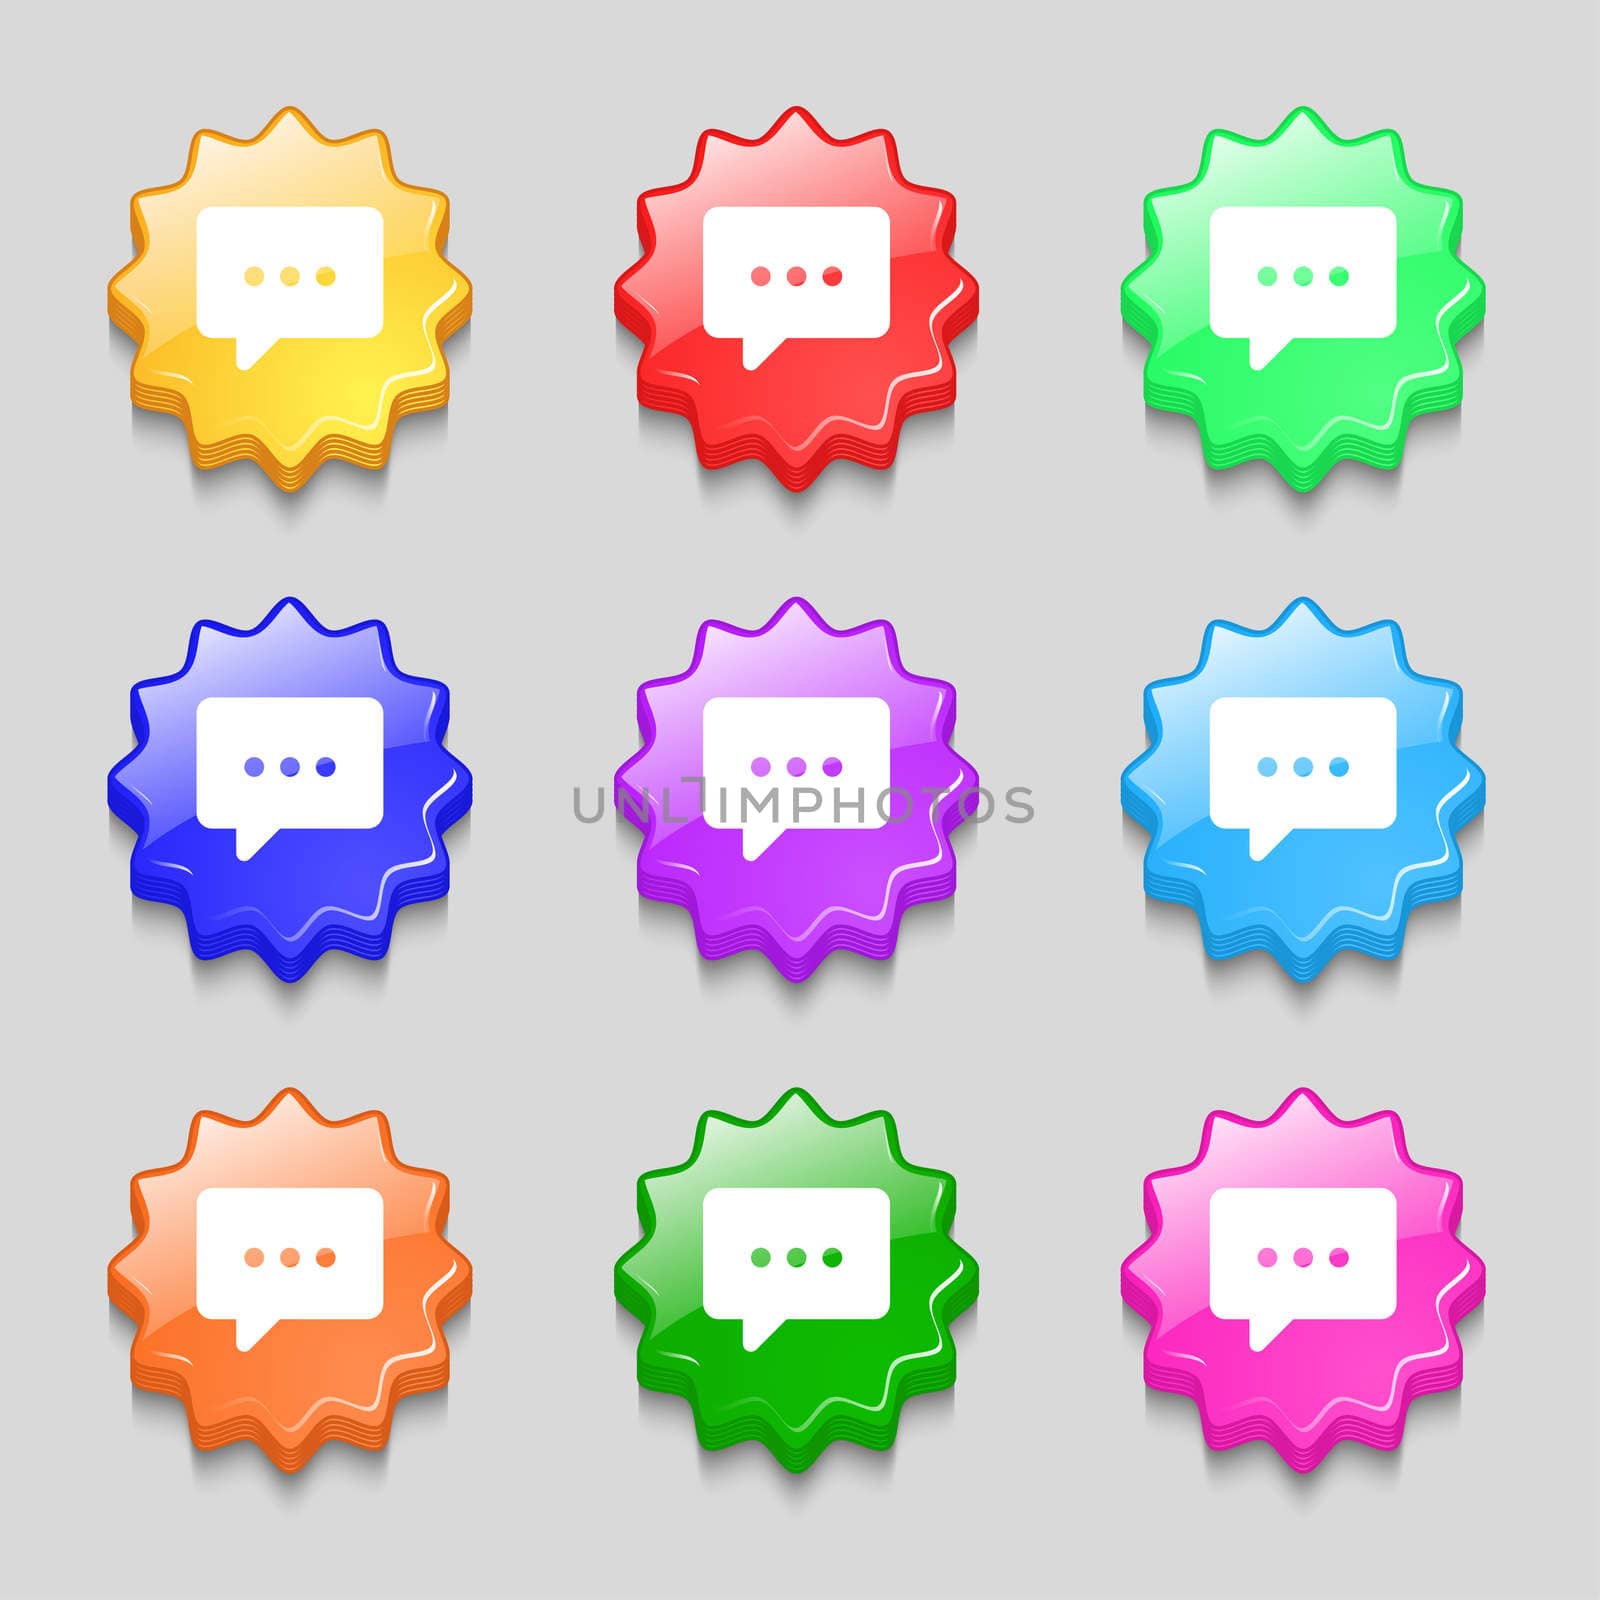 Cloud of thoughts icon sign. symbol on nine wavy colourful buttons. illustration